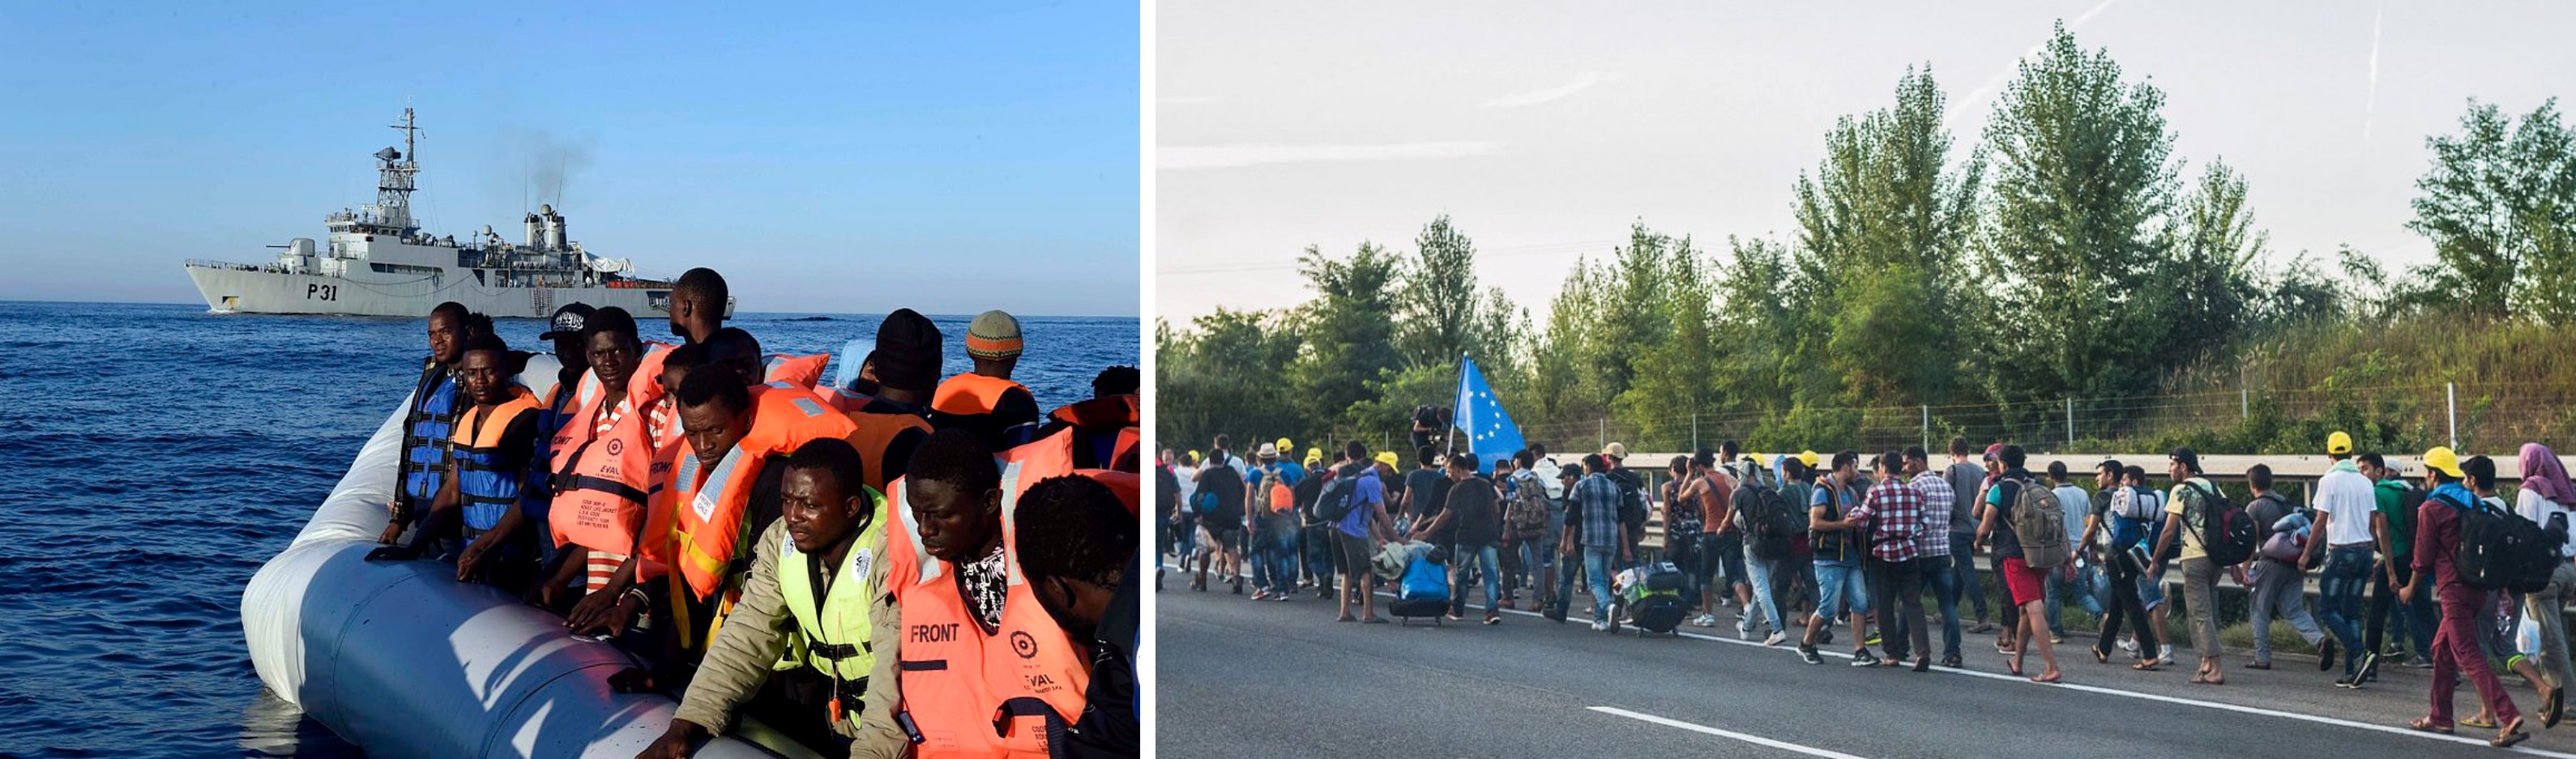 On the left, rescued migrants arriving in Italy. On the right, migrants walking through Hungary on their way to Austria.